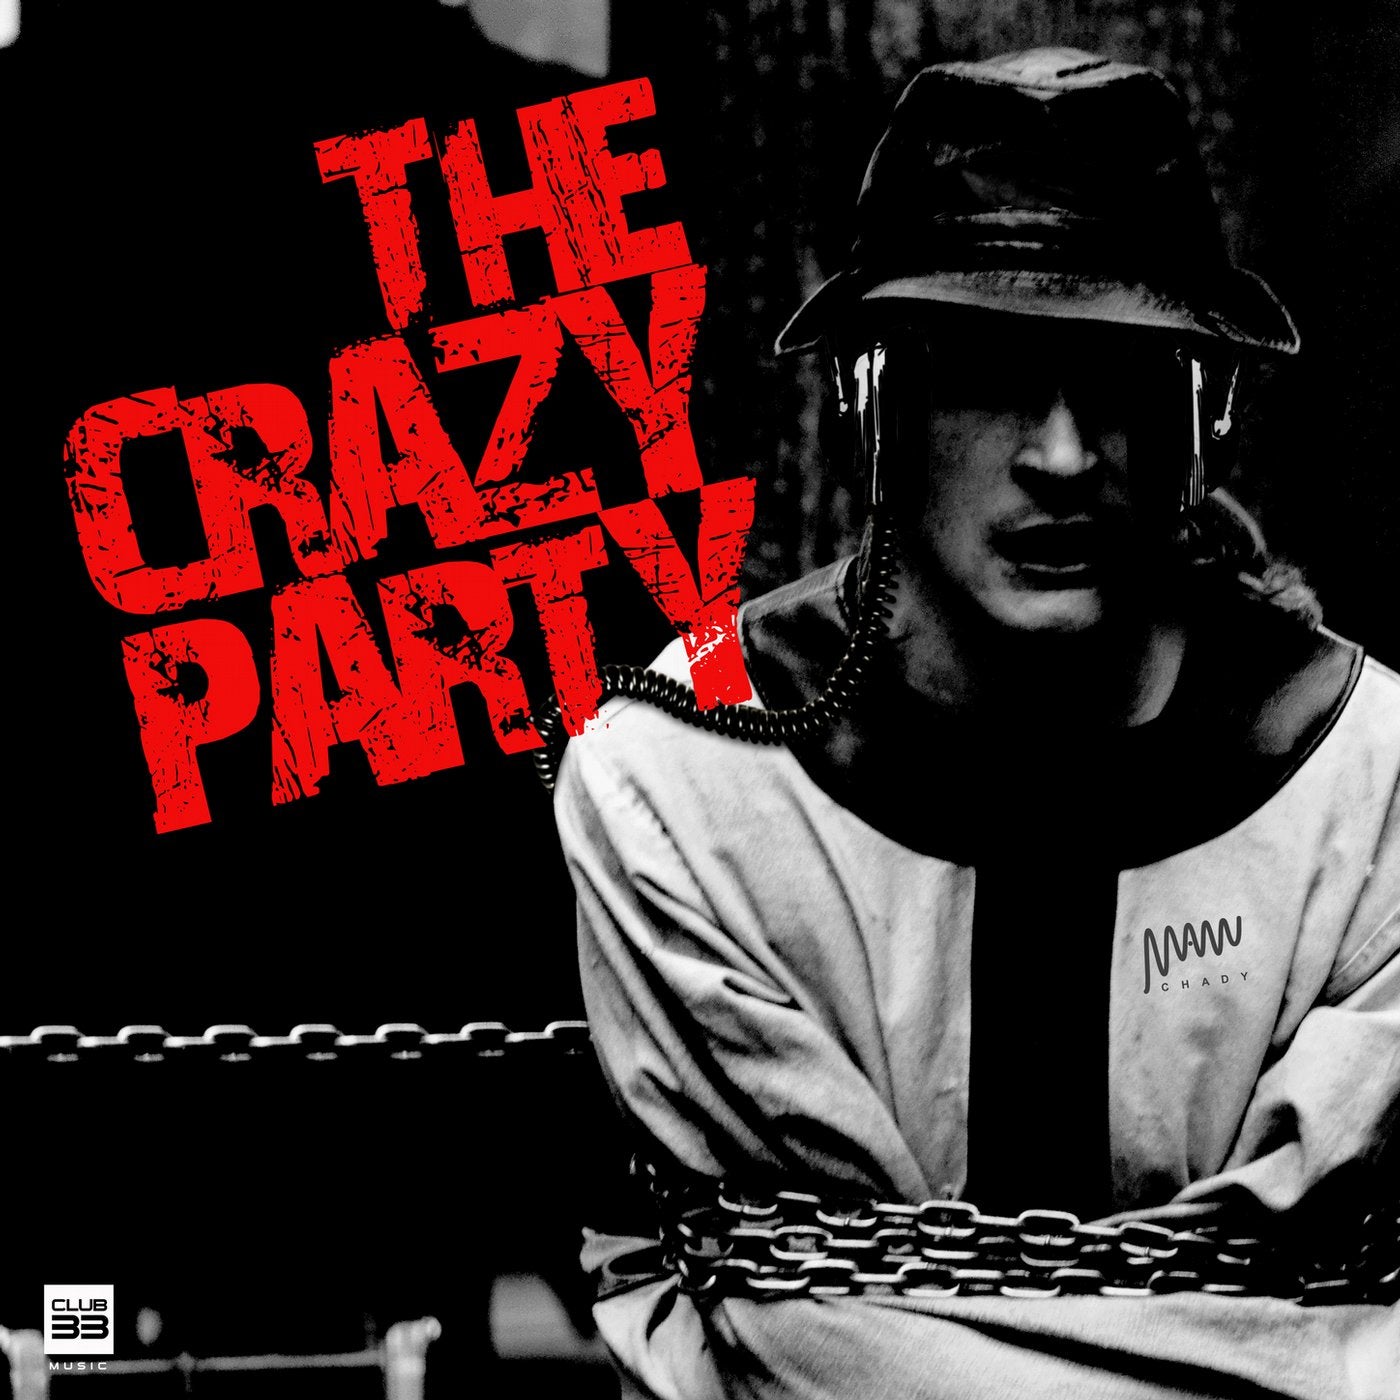 The Crazy Party